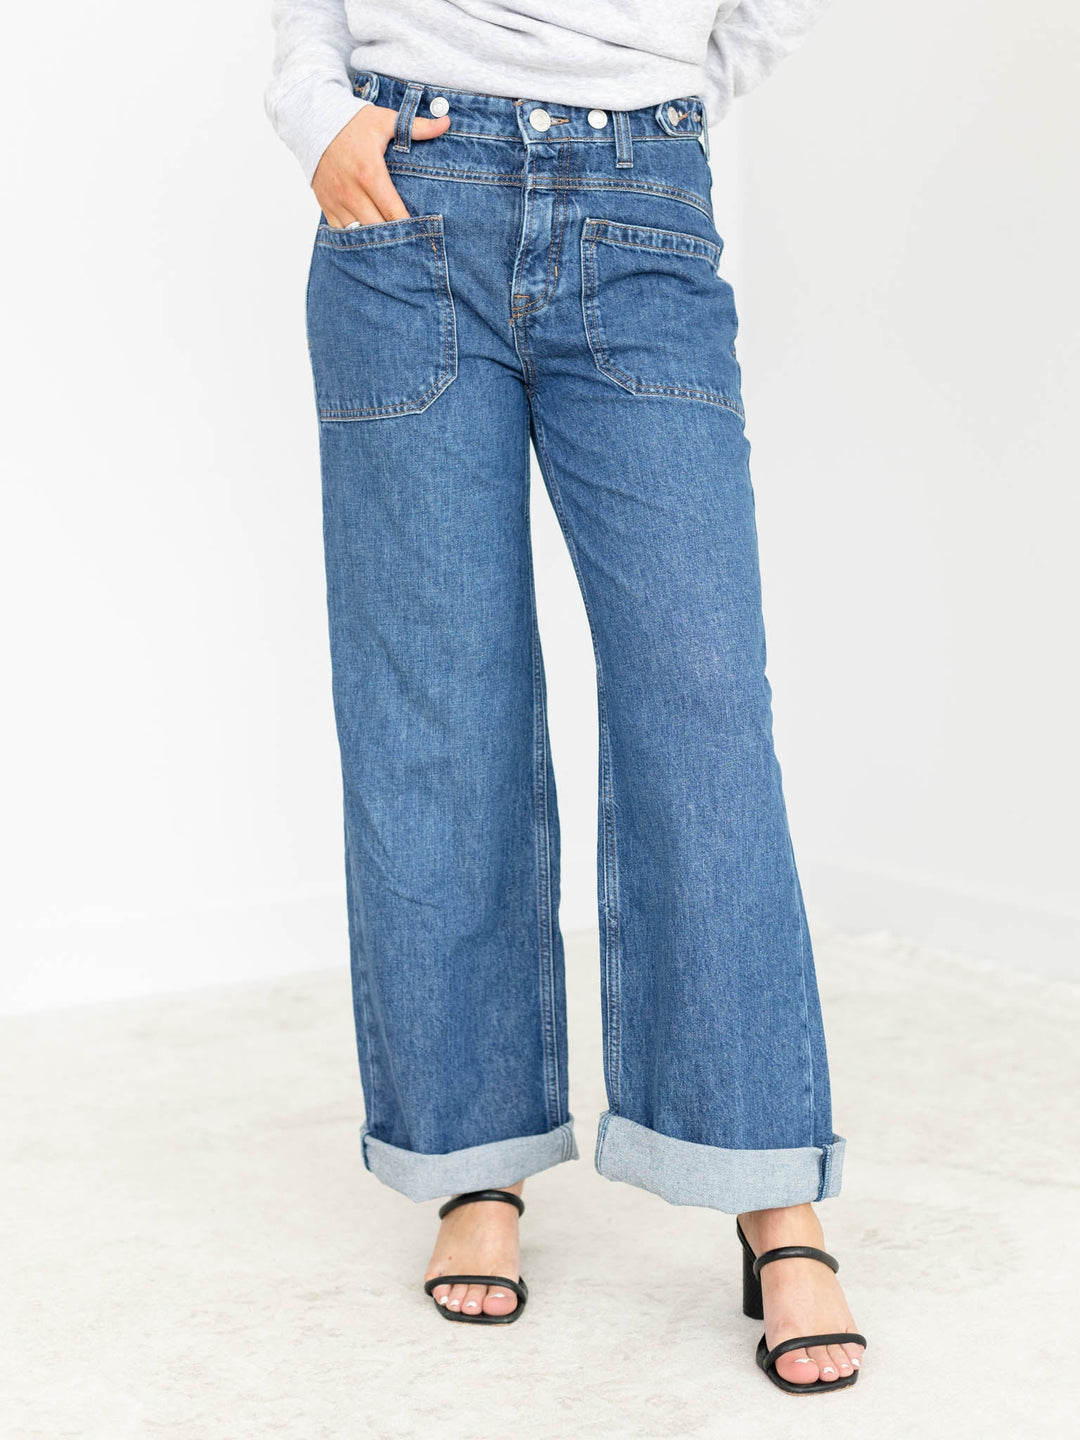 Free People Tunnel Vision Palmer Cuffed JeanDenim jeans